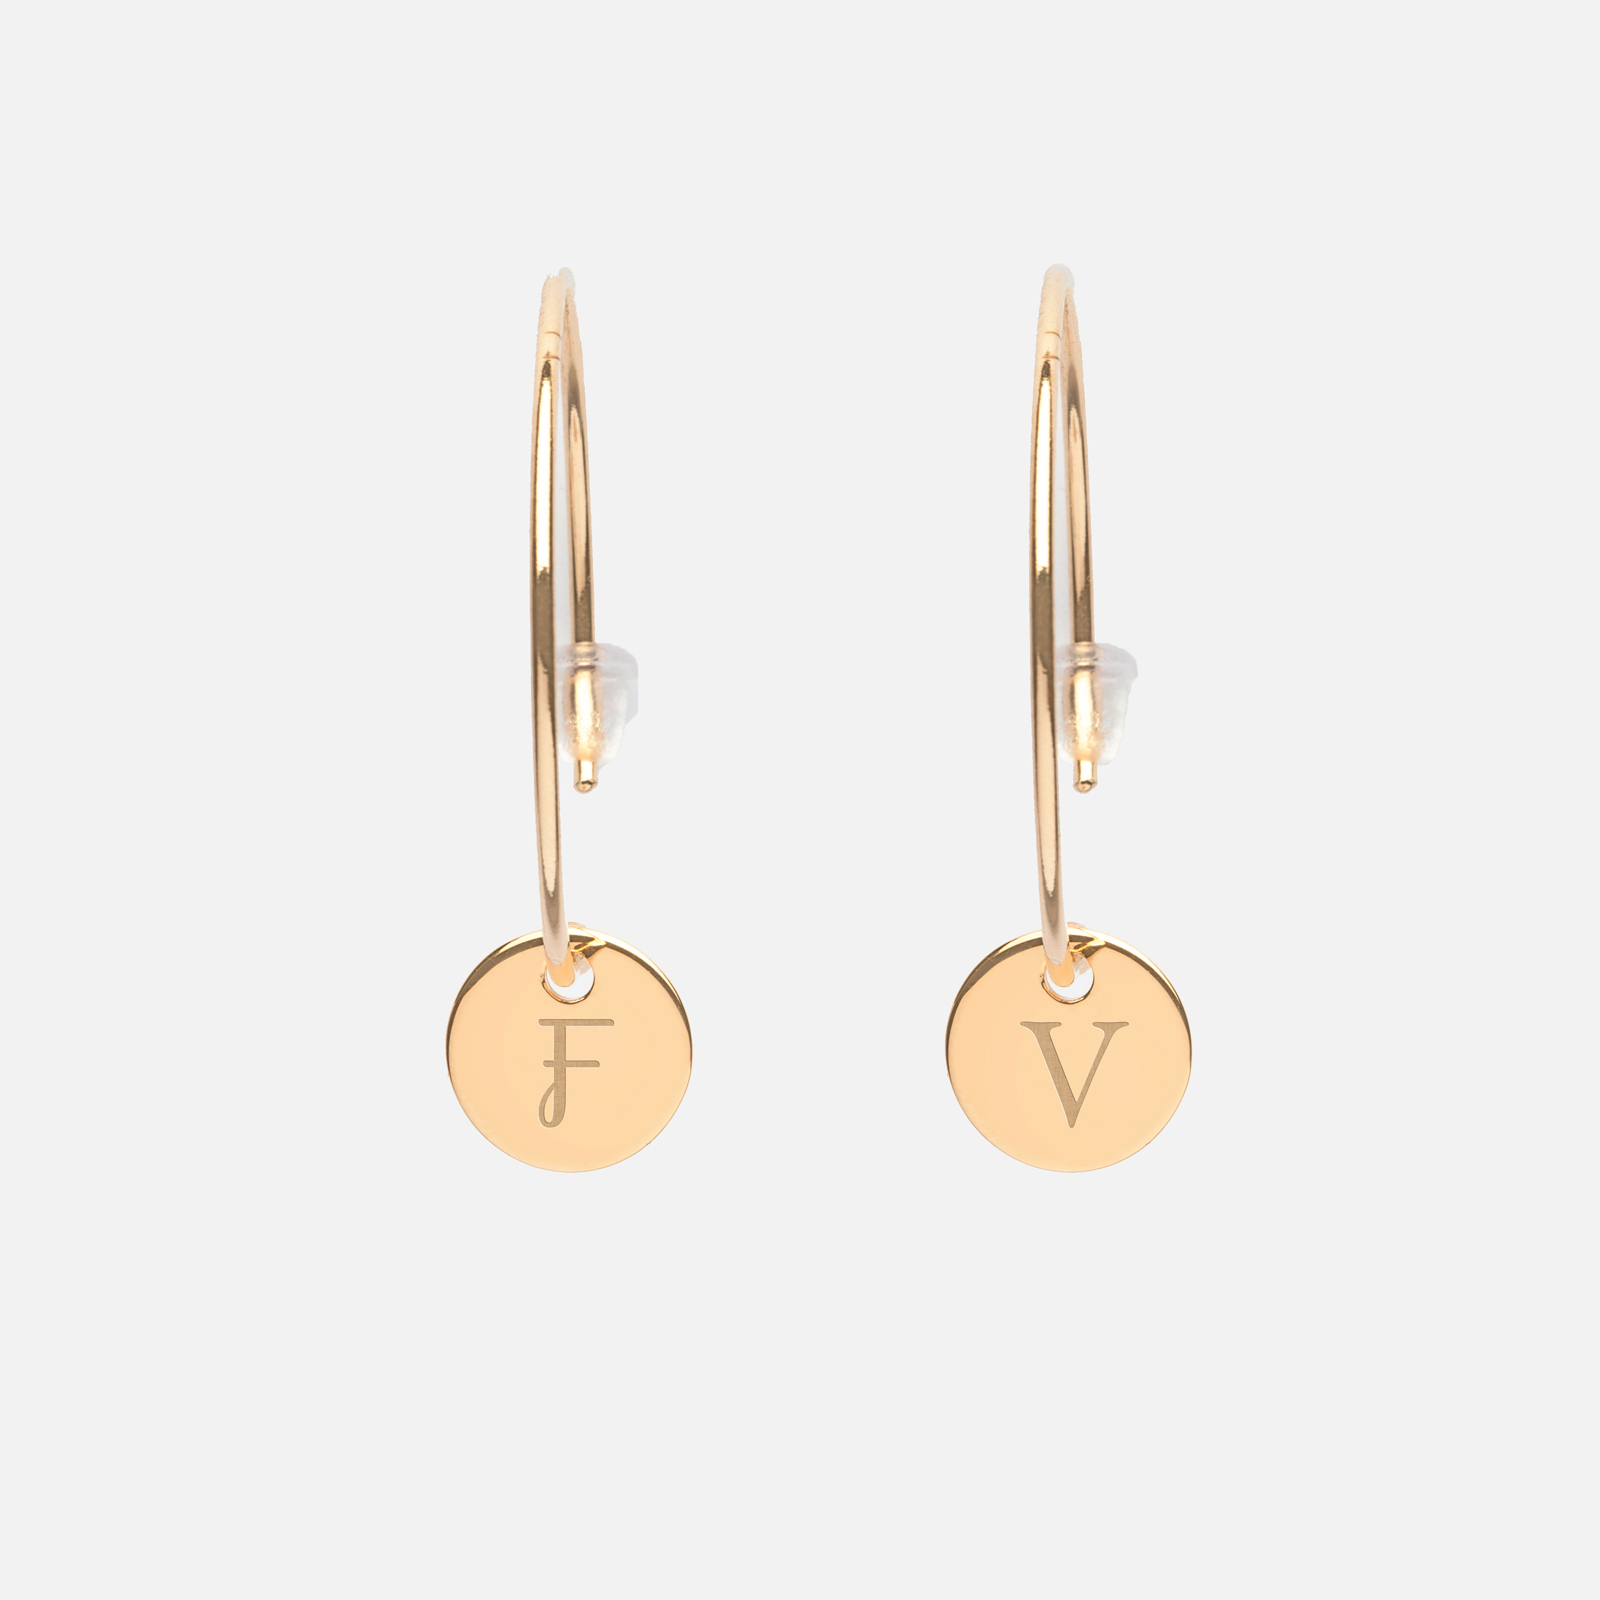 Creole earrings personalised medals engraved 10 mm gold-plated initial gold-plated